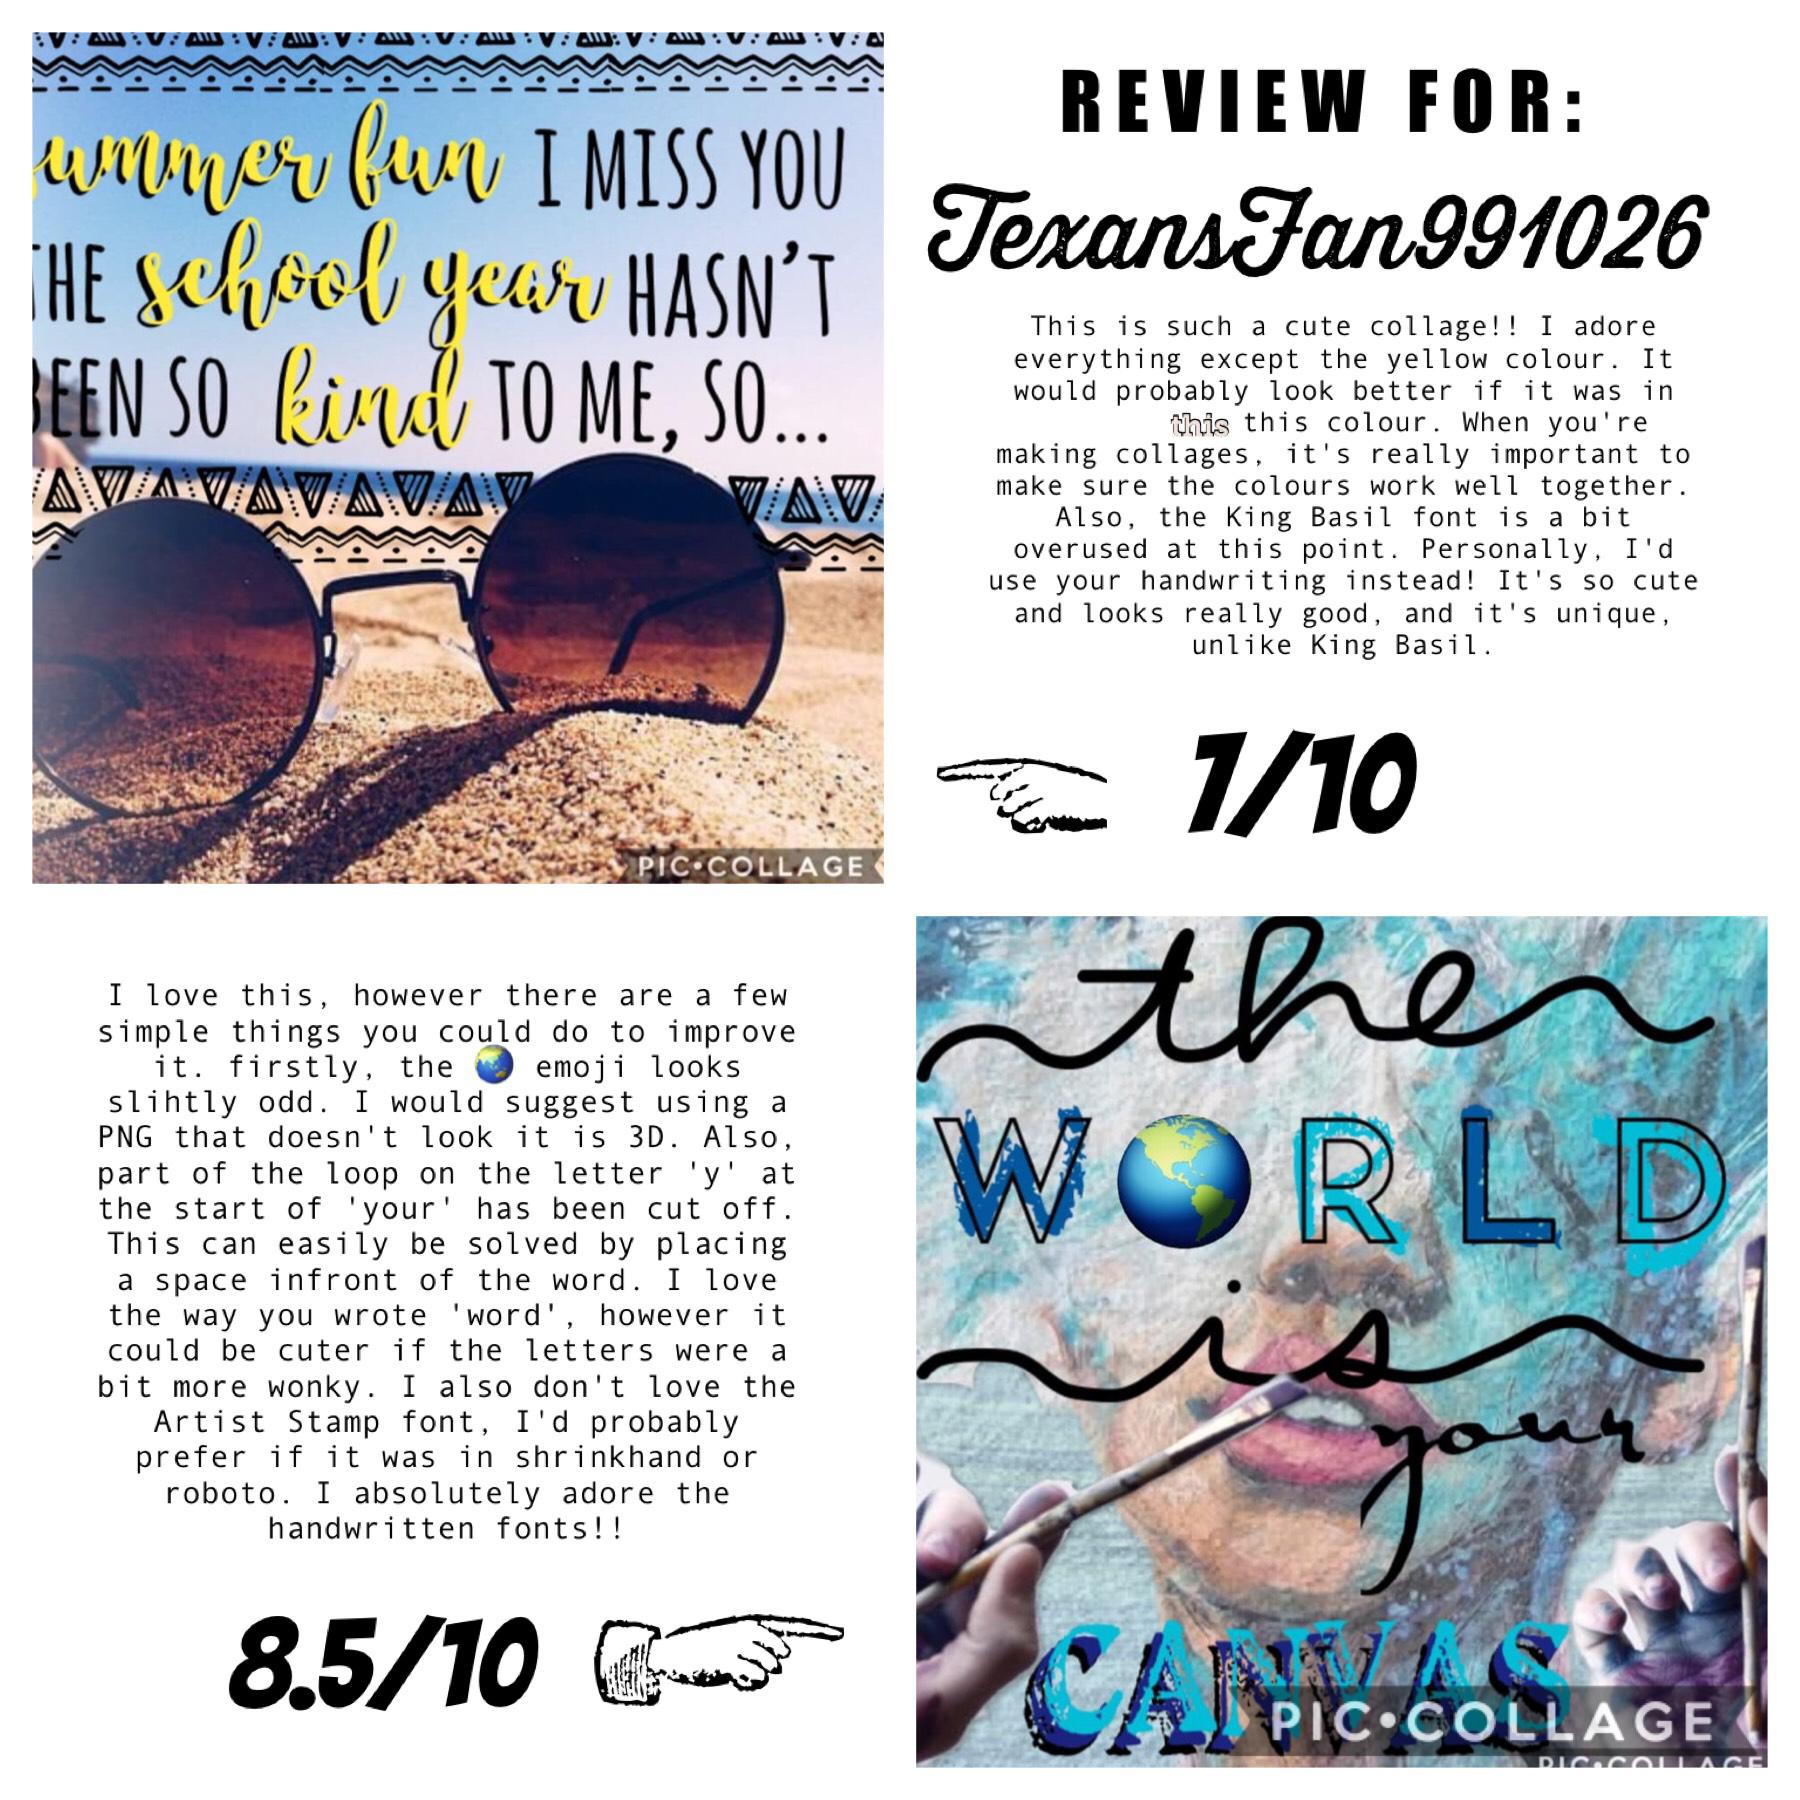 Collage by rainbow_reviews